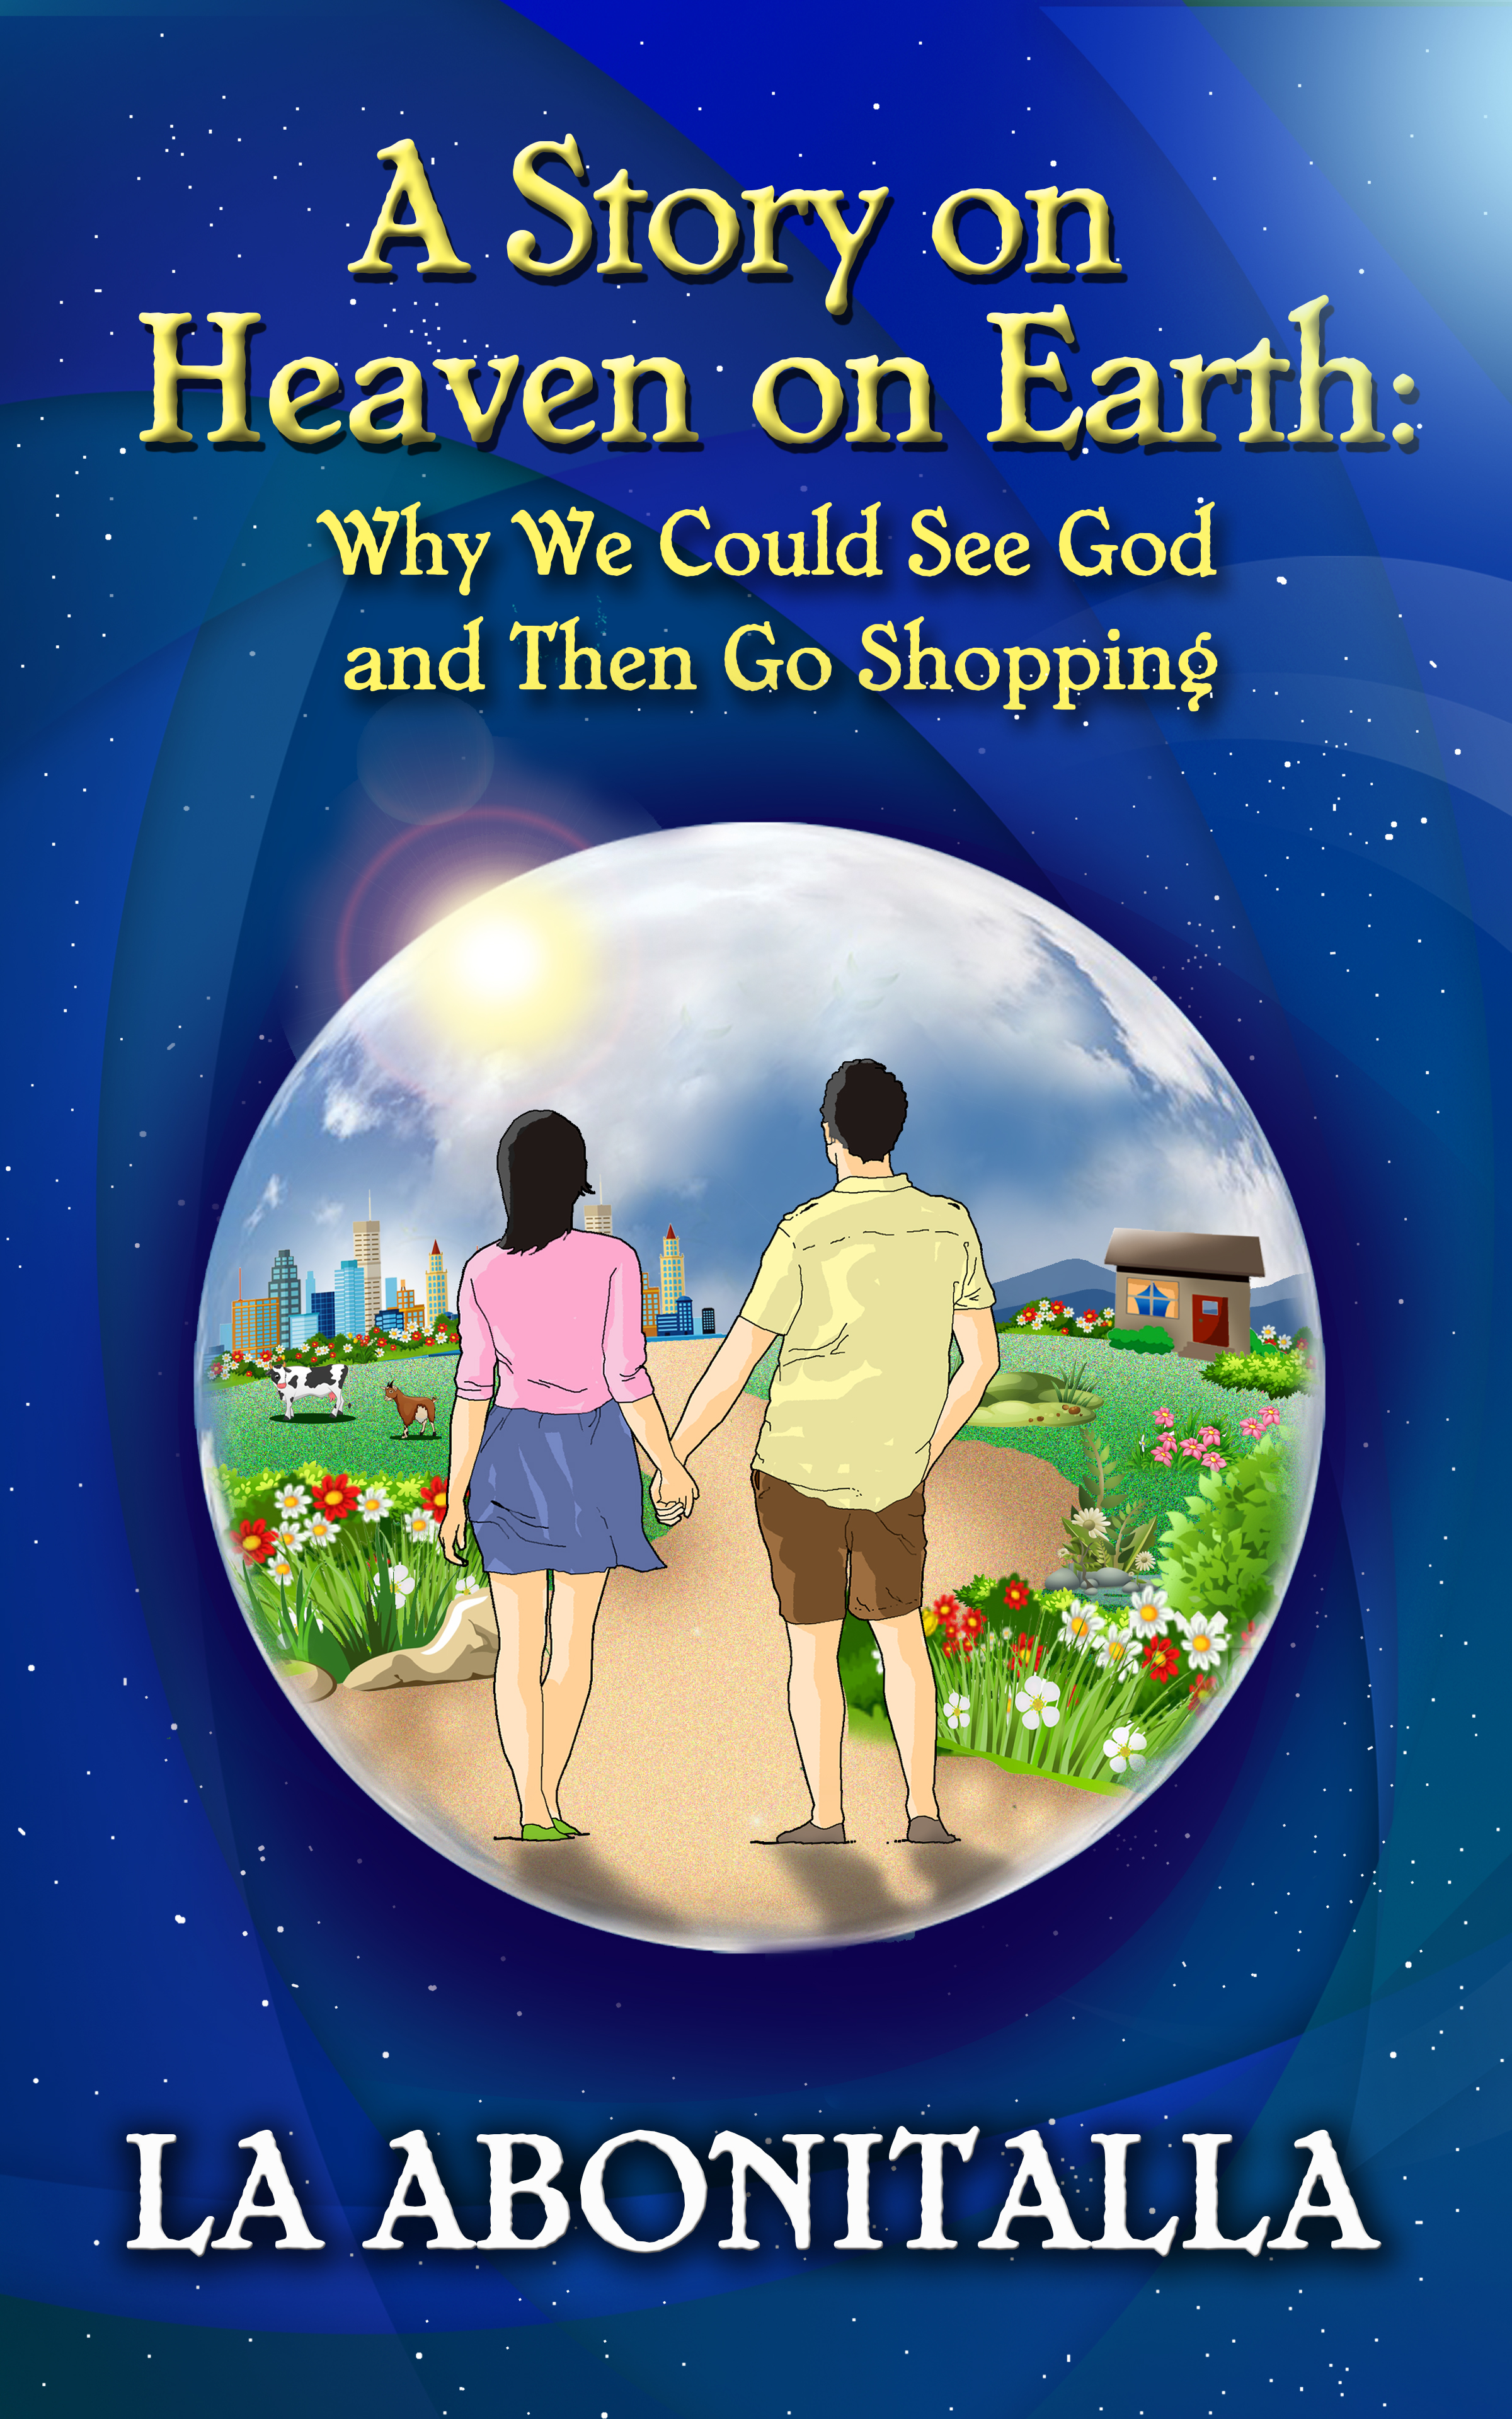 FREE: A Story on Heaven on Earth:Why We Could See God and Then Go Shopping by LA Abonitalla